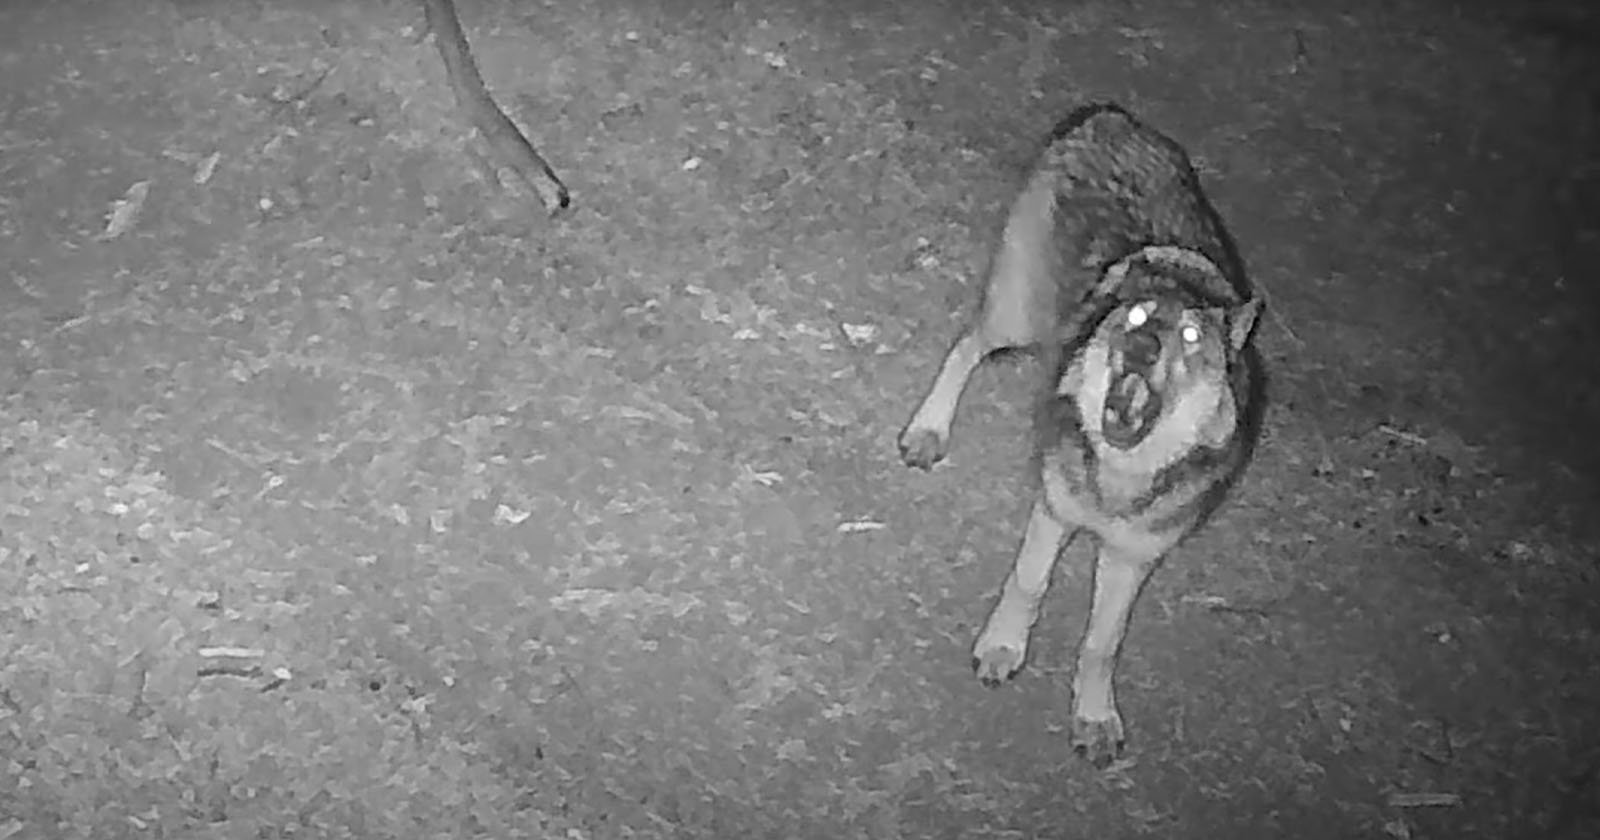  trail camera captures iconic howl prove wolves are 